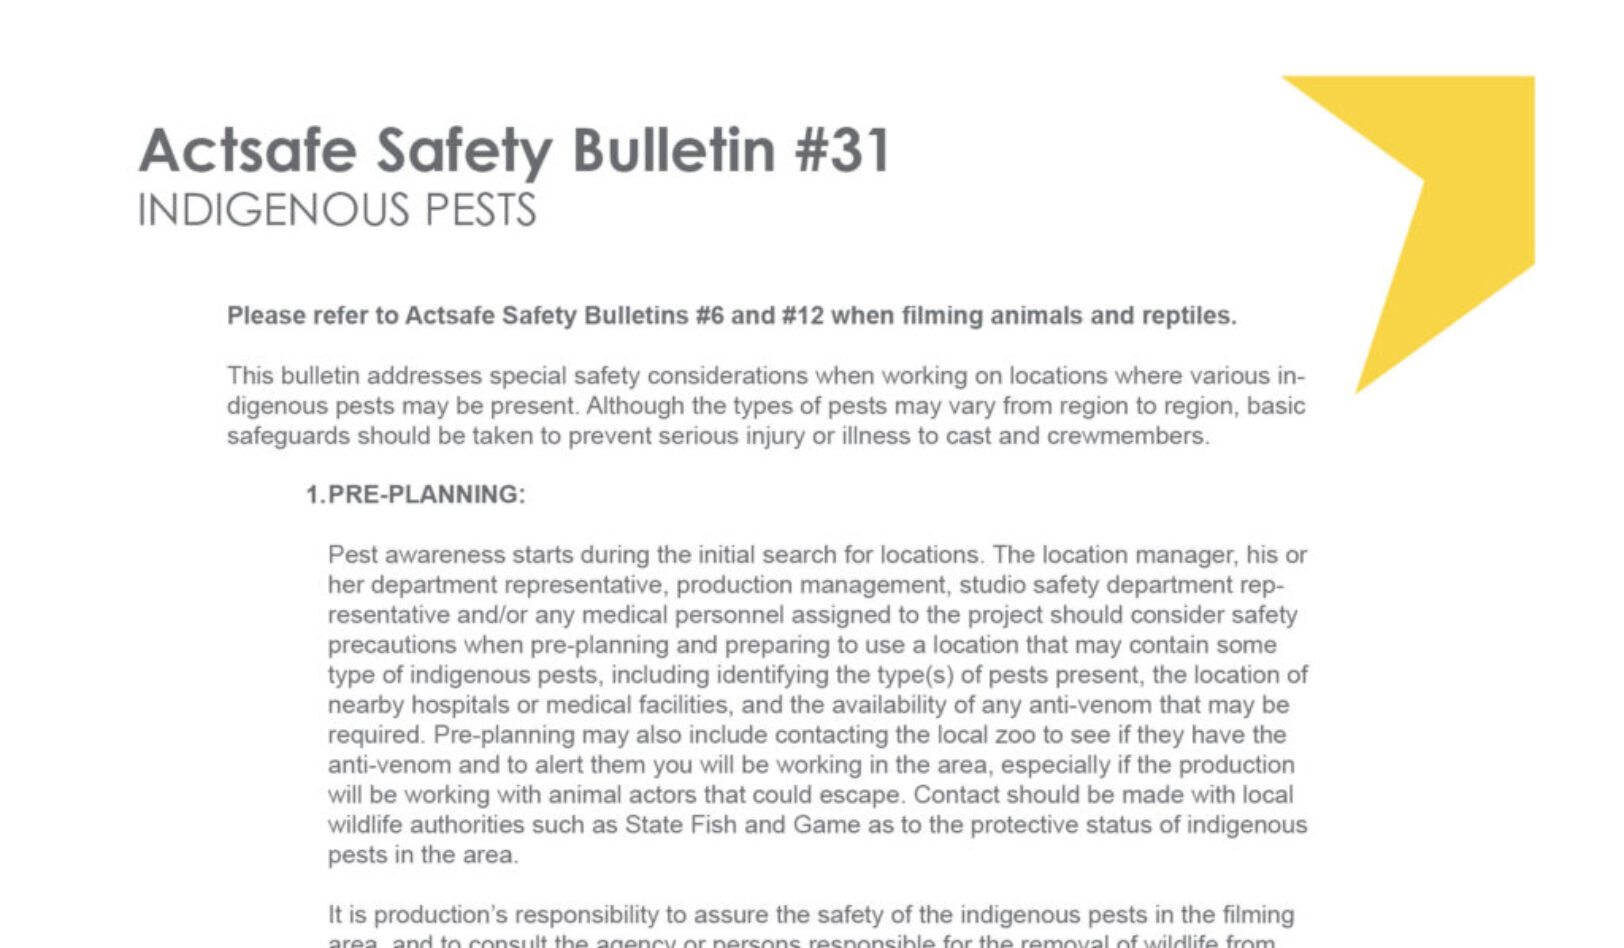 #31 Indigenous Pests Motion Picture Safety Bulletin